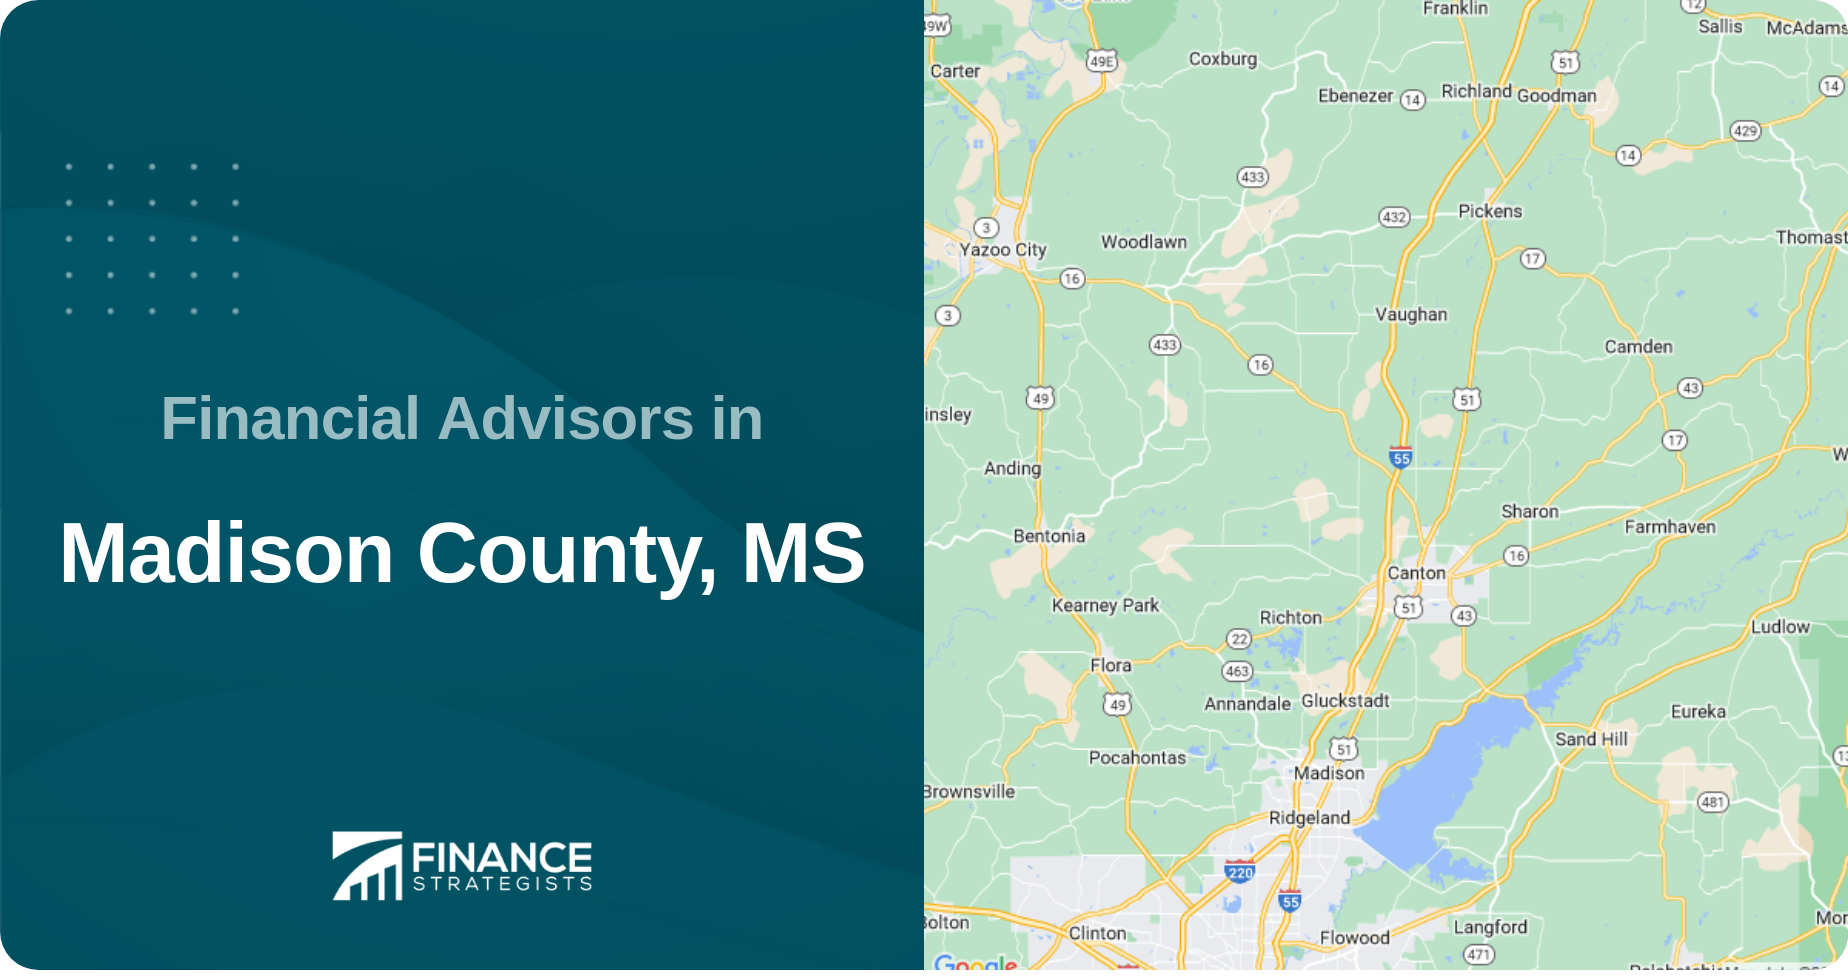 Financial Advisors in Madison County, MS